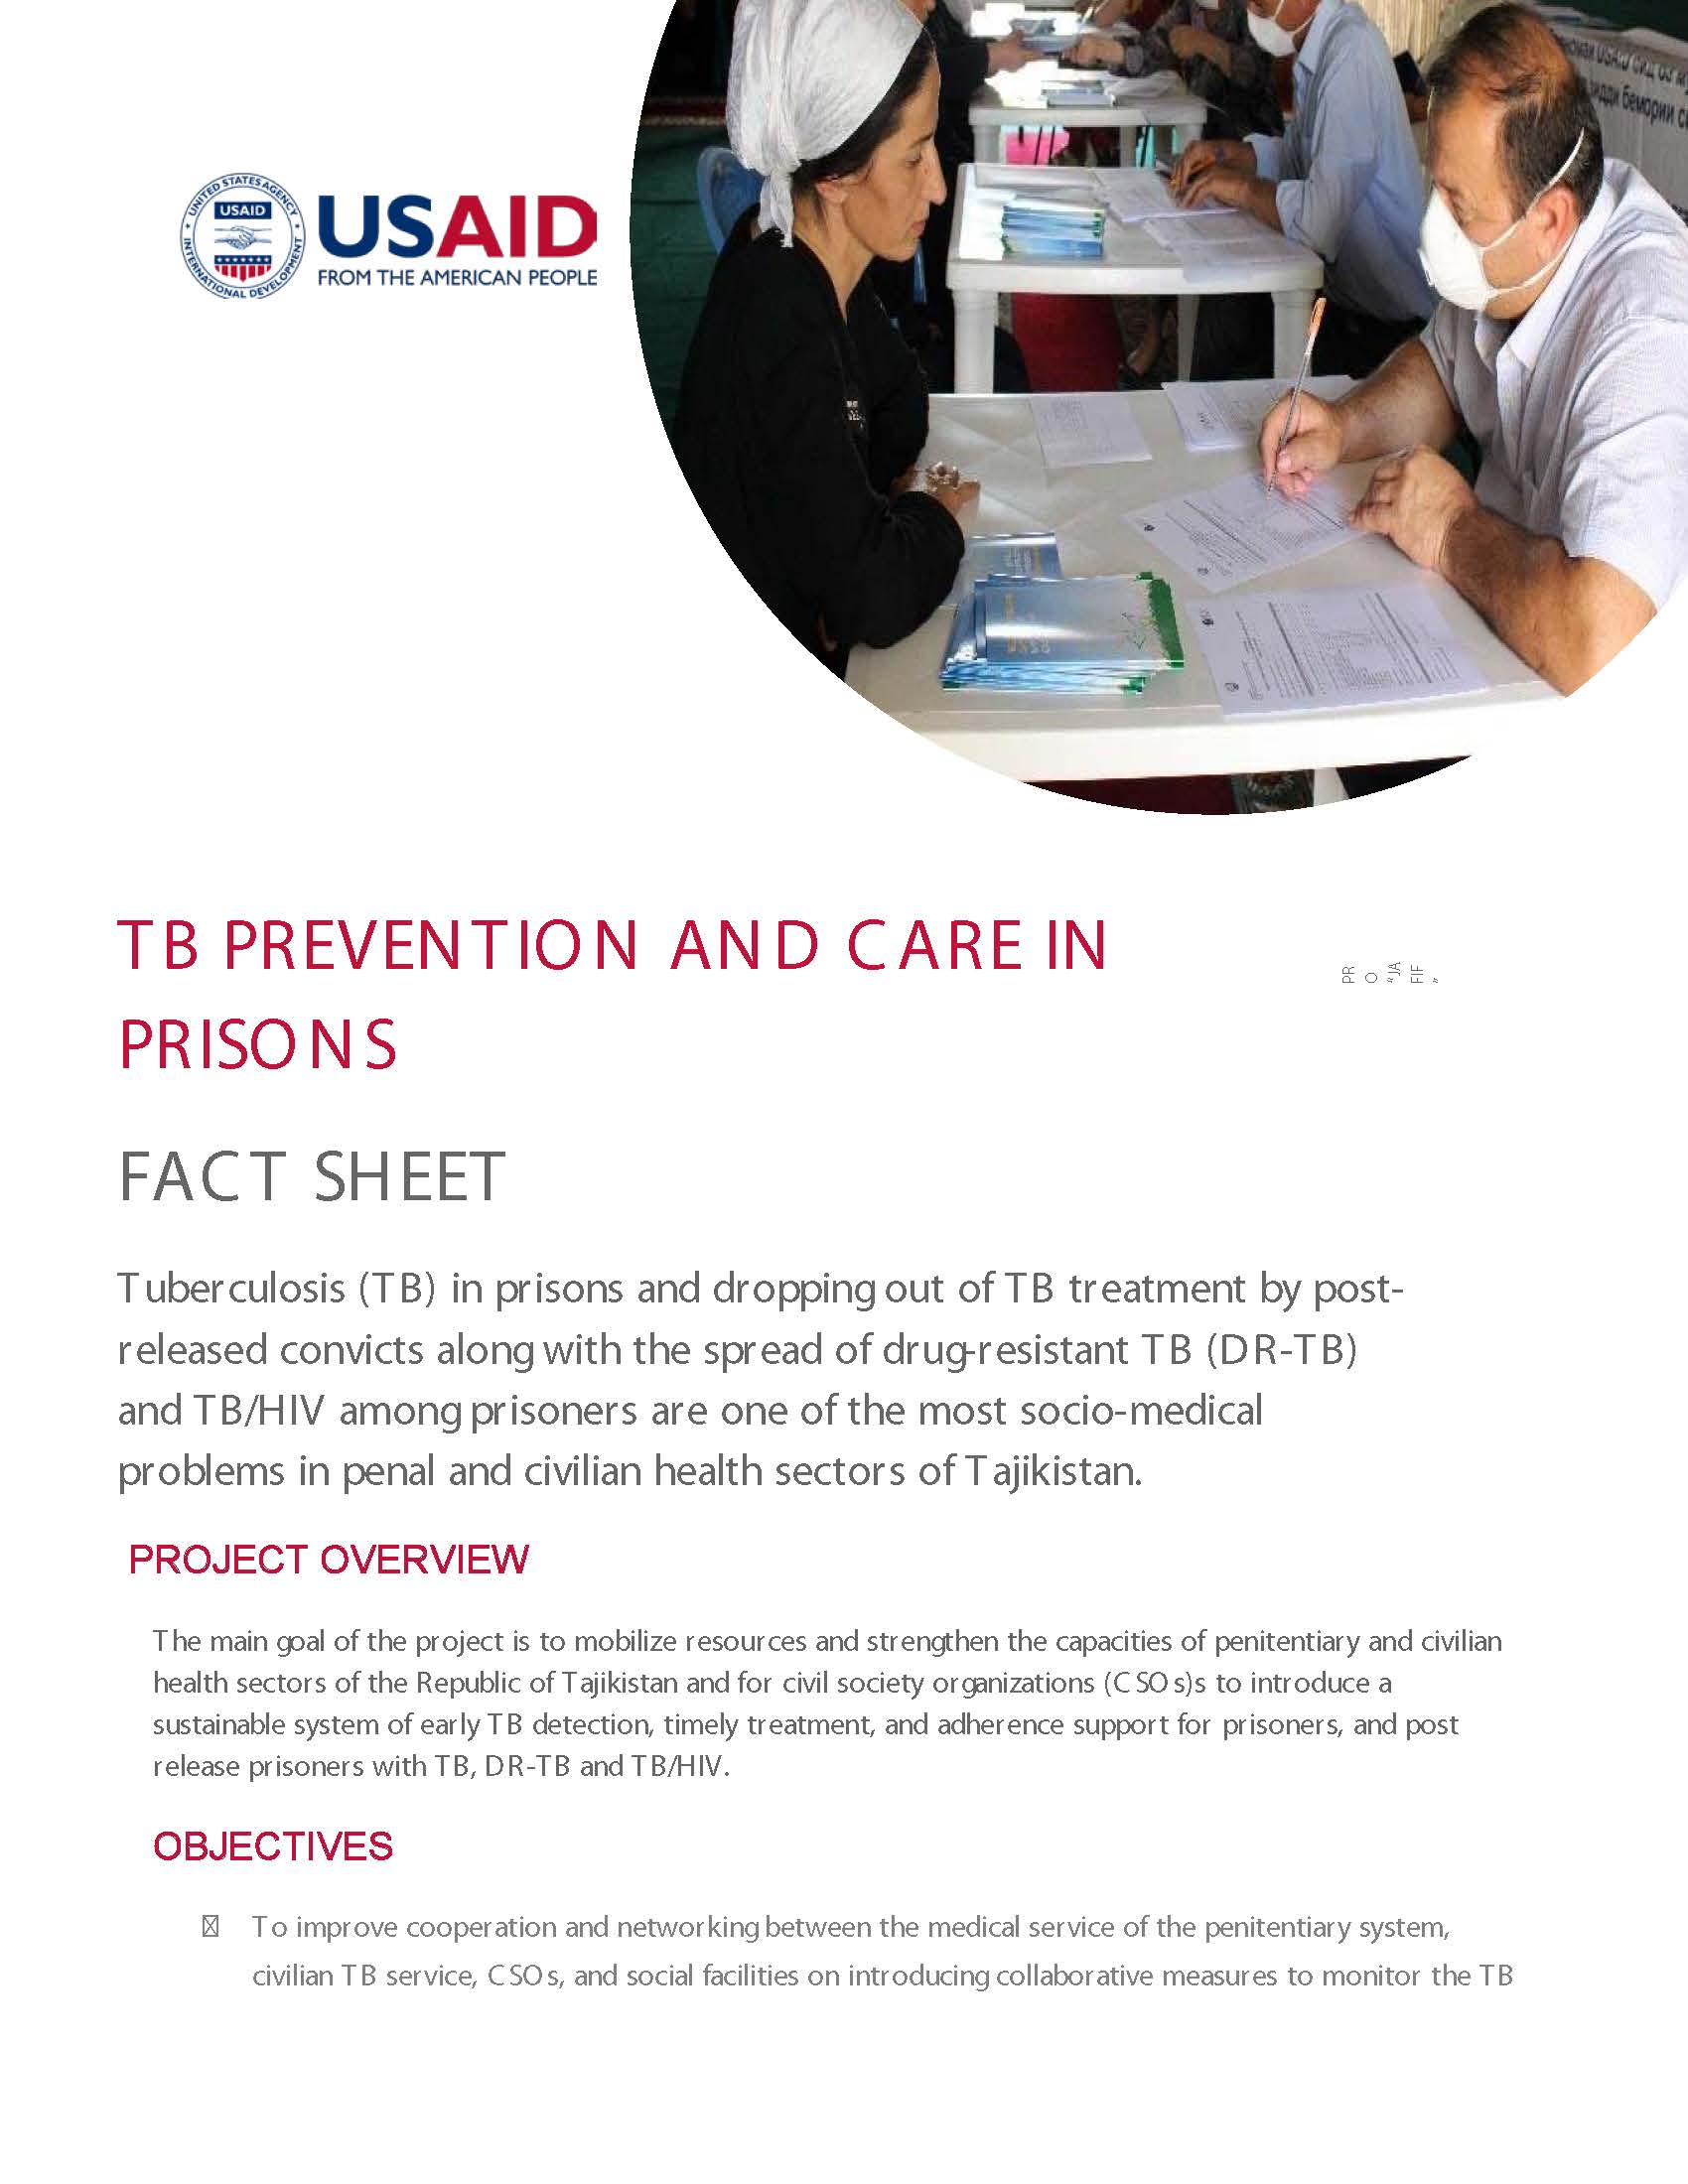 TB Prevention and Care in Prisons Fact Sheet